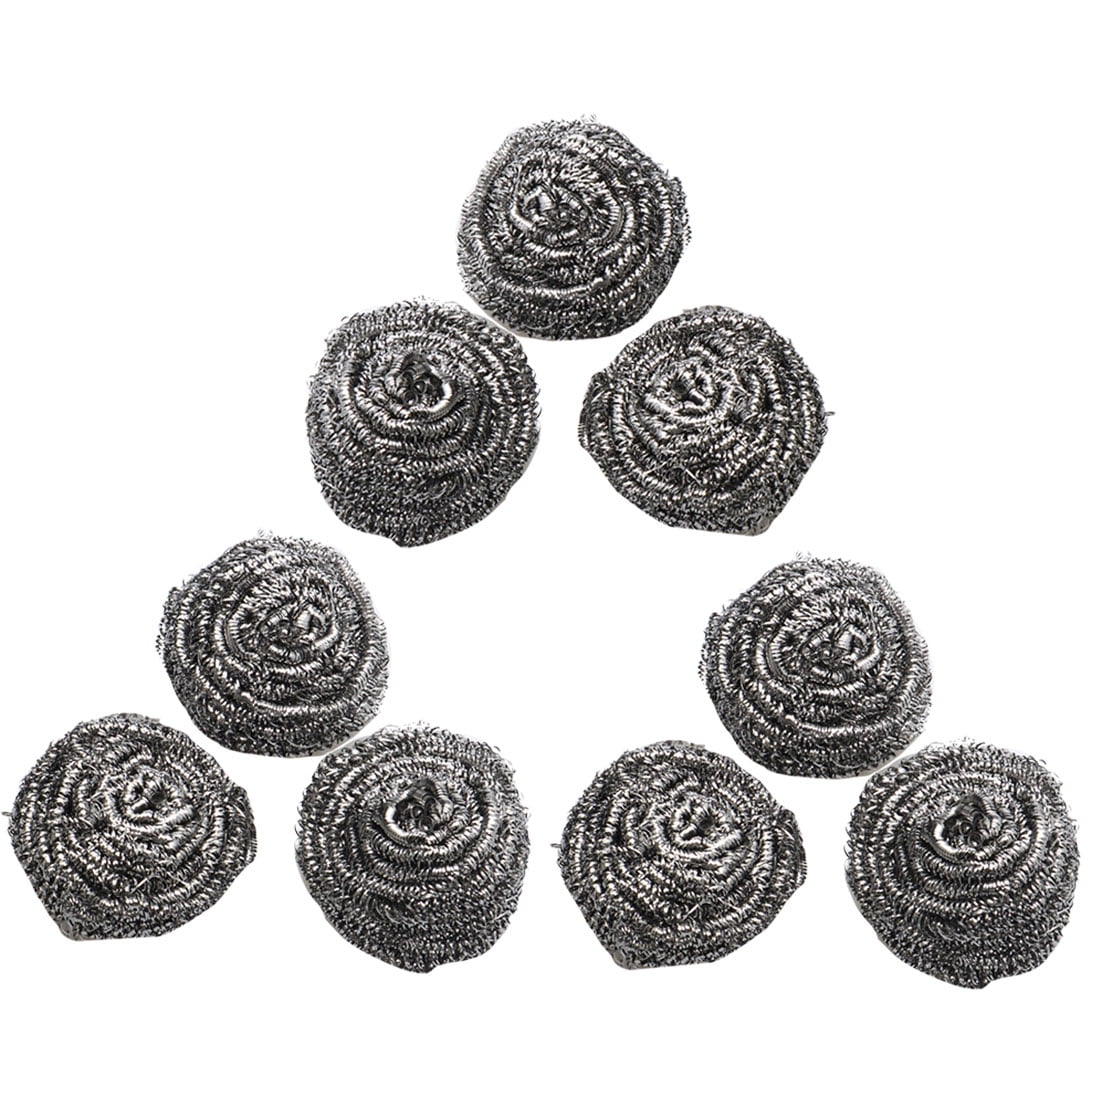 SCOURERS STAINLESS STEEL WIRE KITCHEN HOME WASHING CLEANING 6 PC SCOURER NEW 